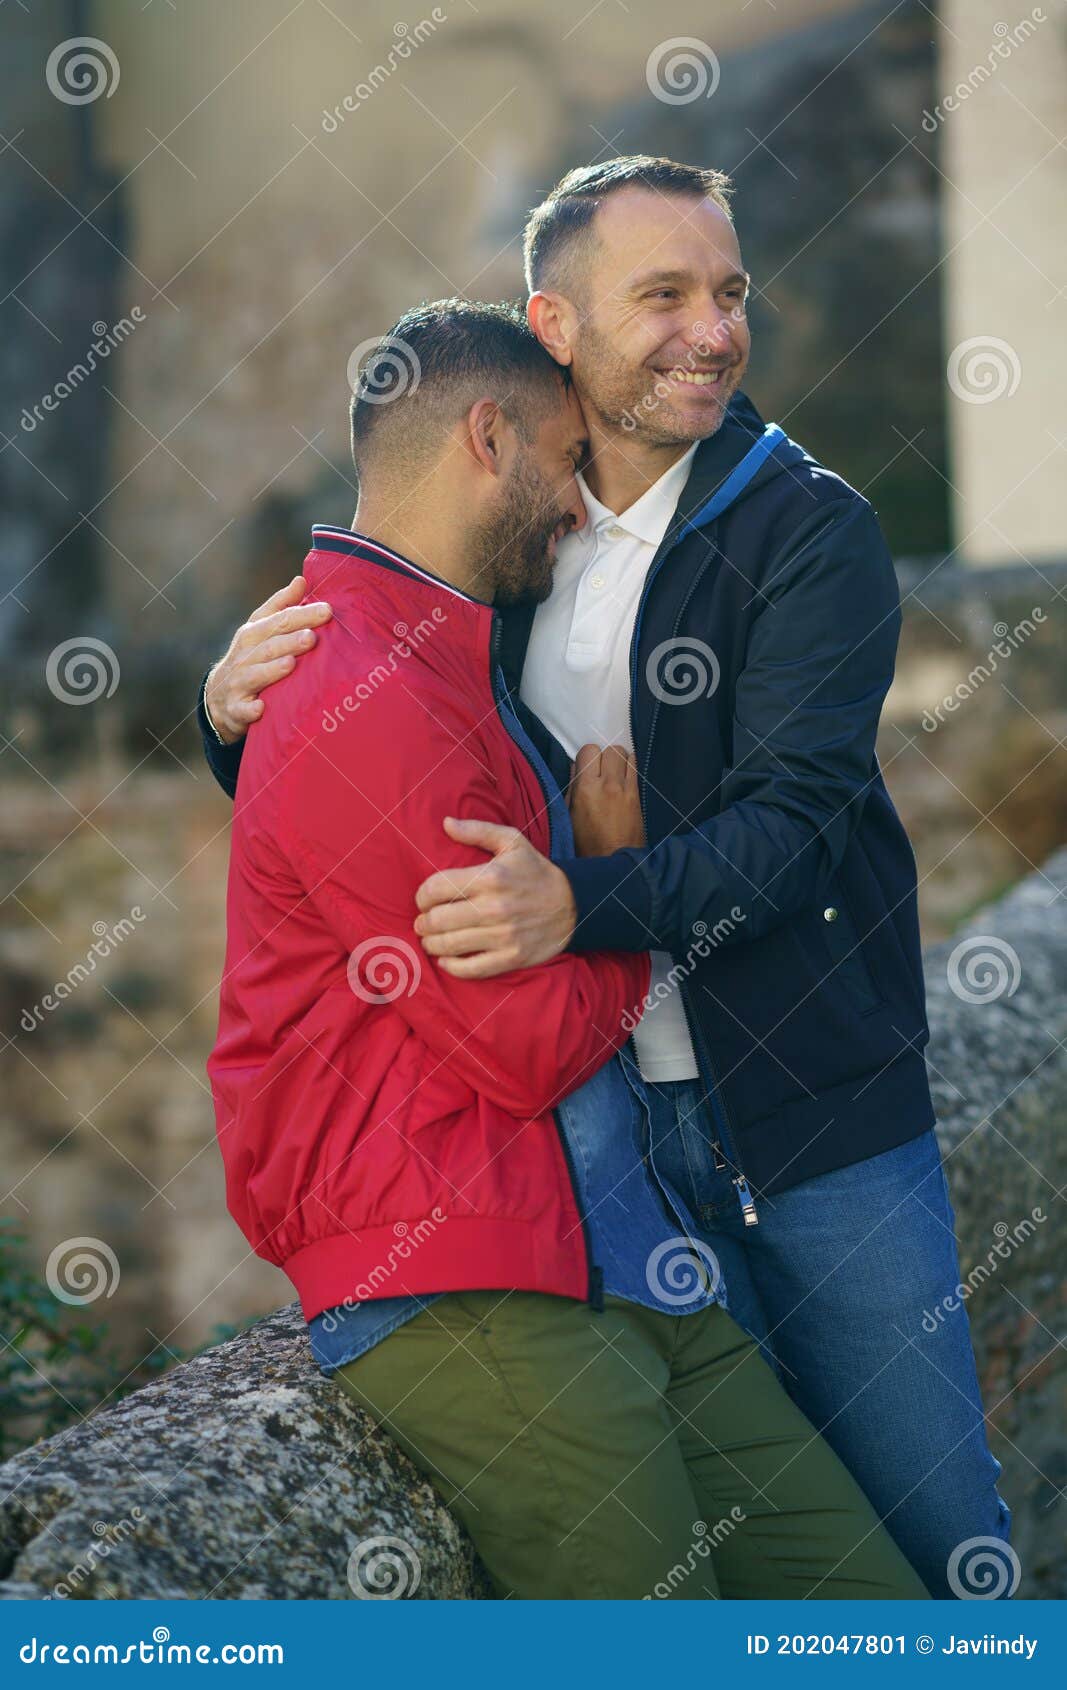 Gay Couple In A Romantic Moment Outdoors Stock Image Image Of Caucasian Granada 202047801